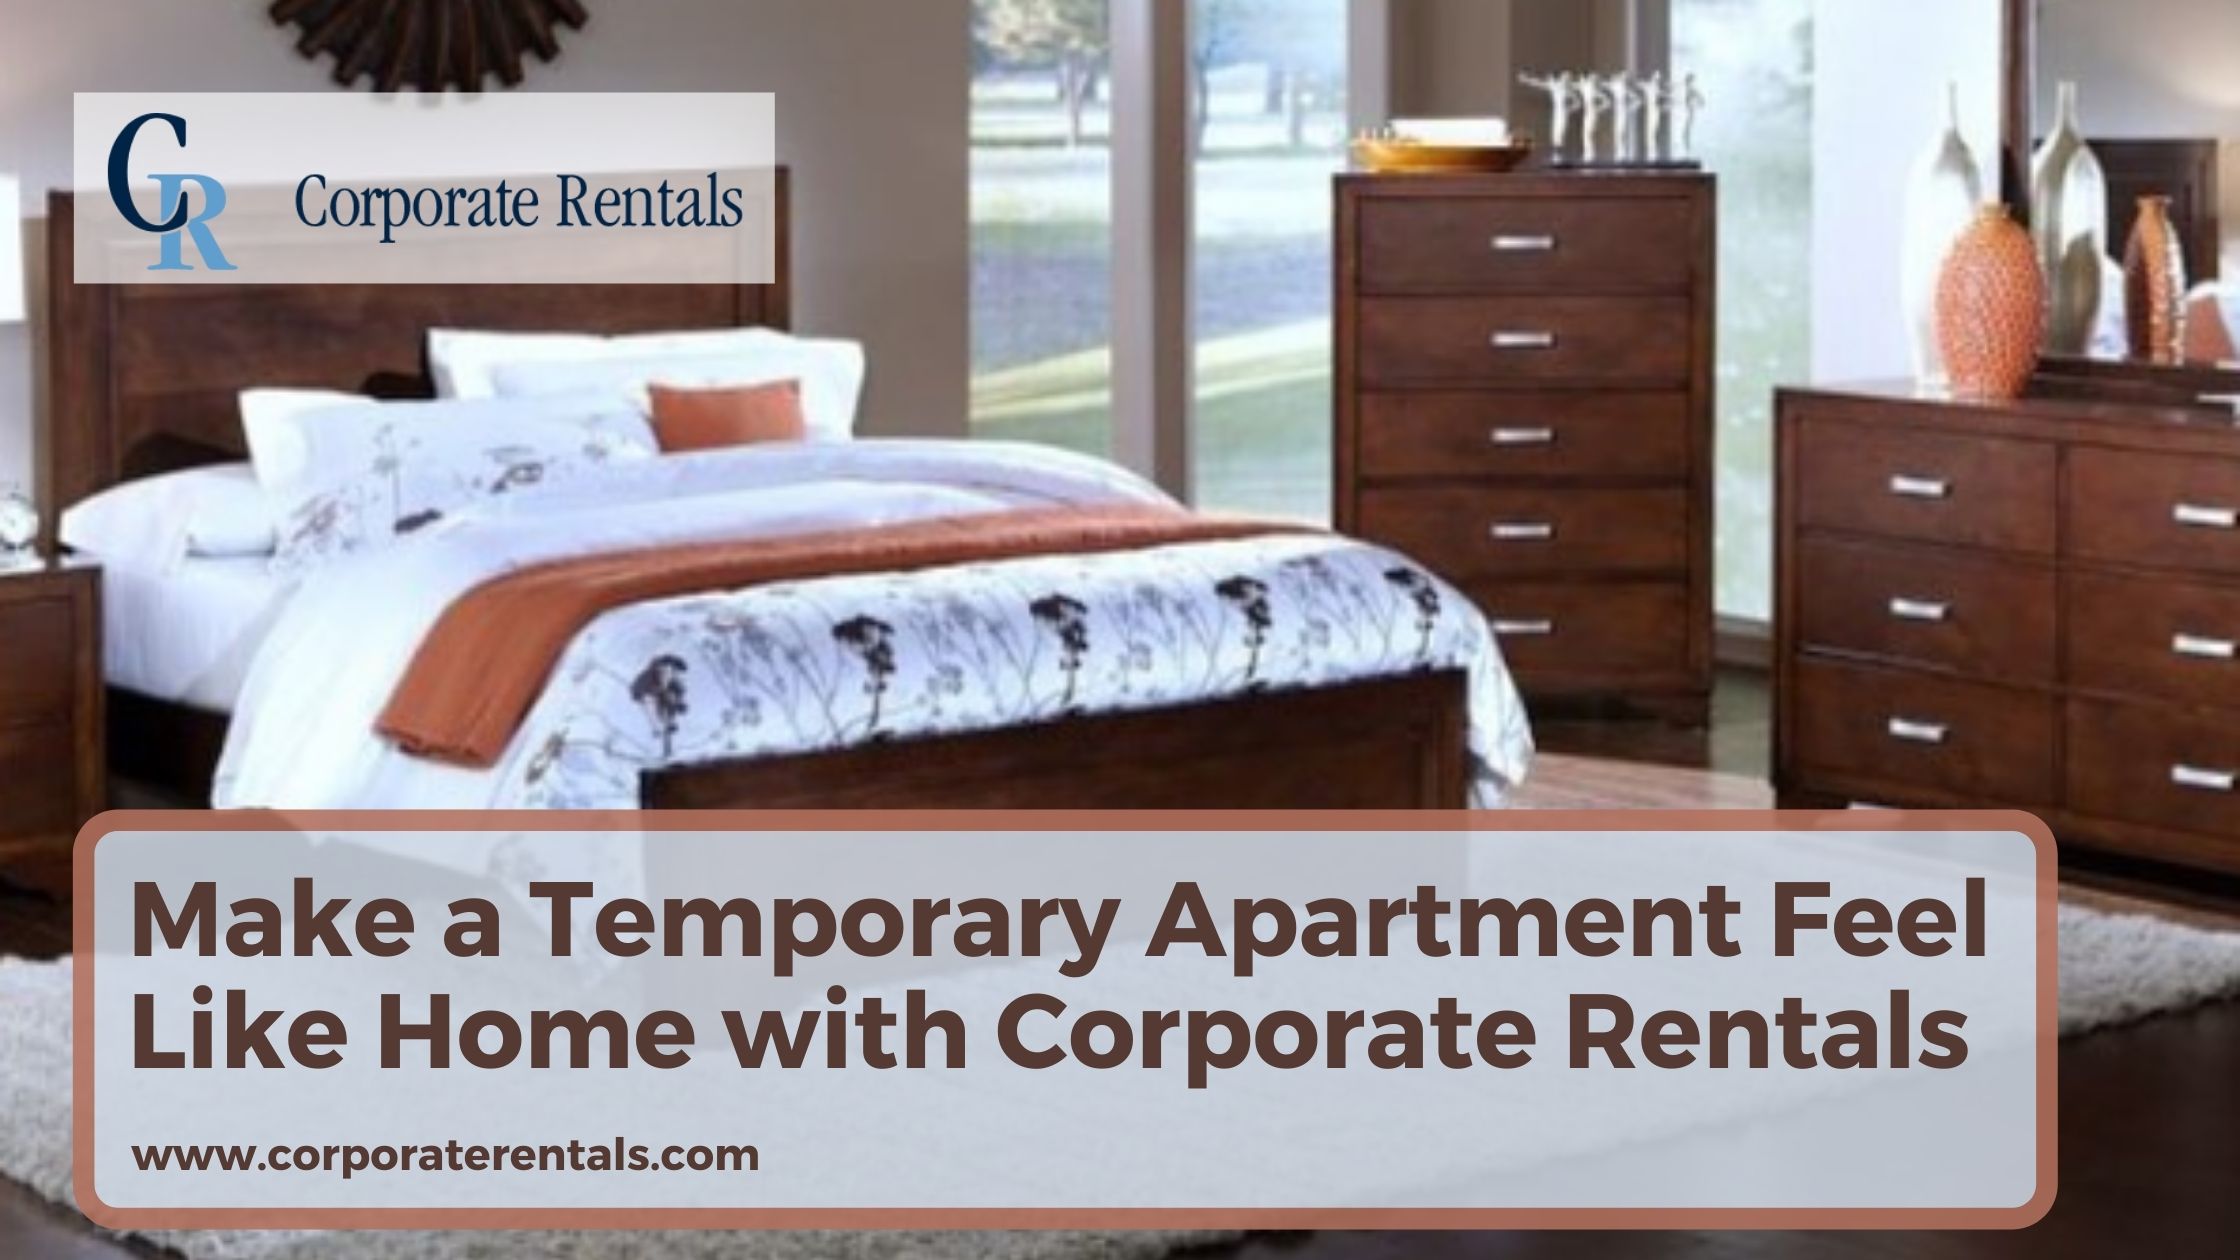 Easy Tips to Make a Temporary Apartment Feel Like Home with Corporate Rentals